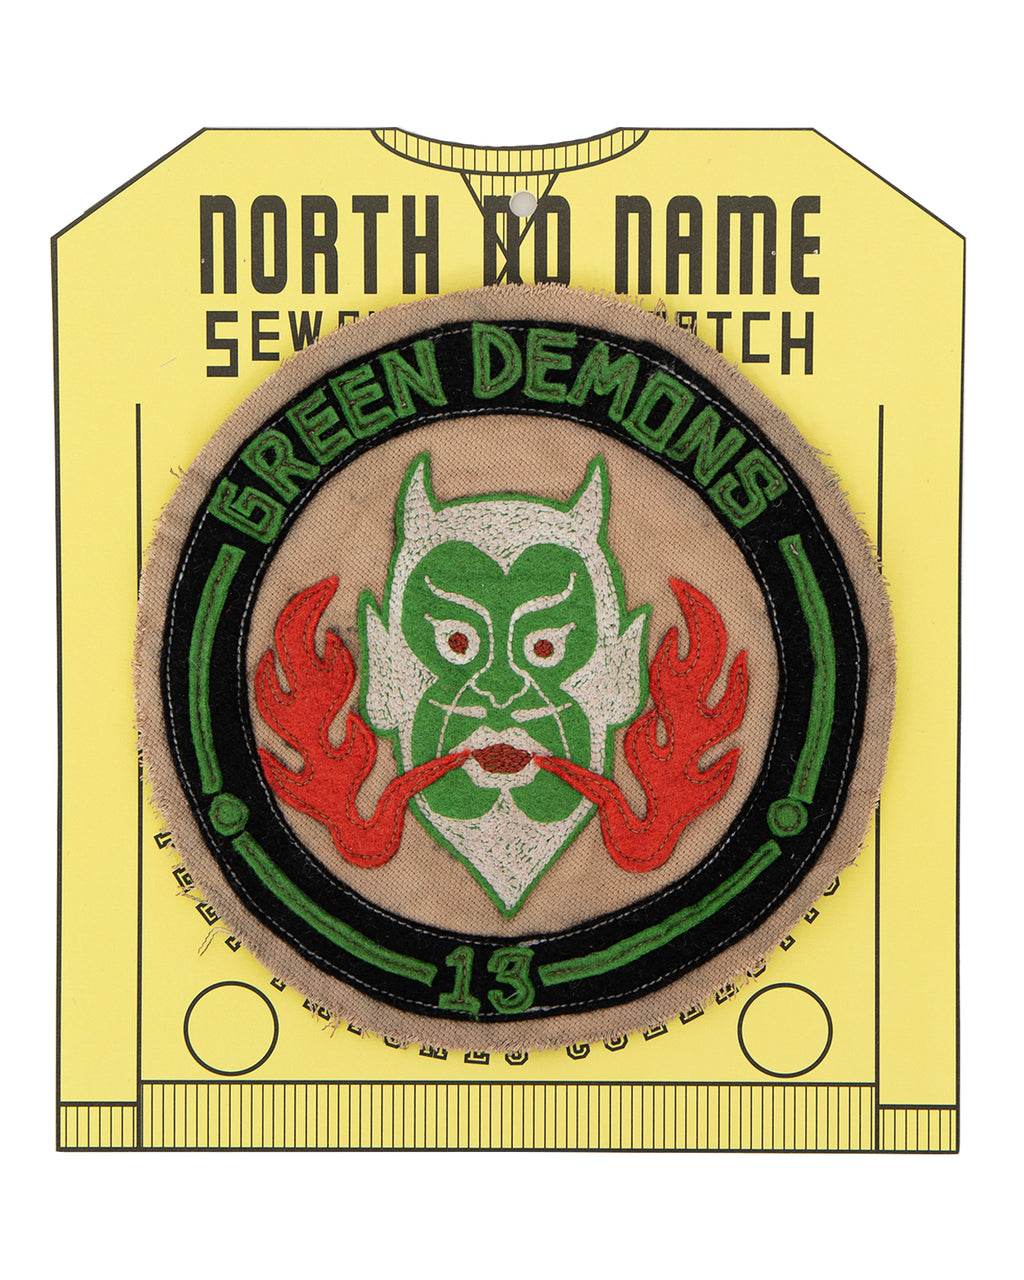 North No Name Felt Patch, Green Demons